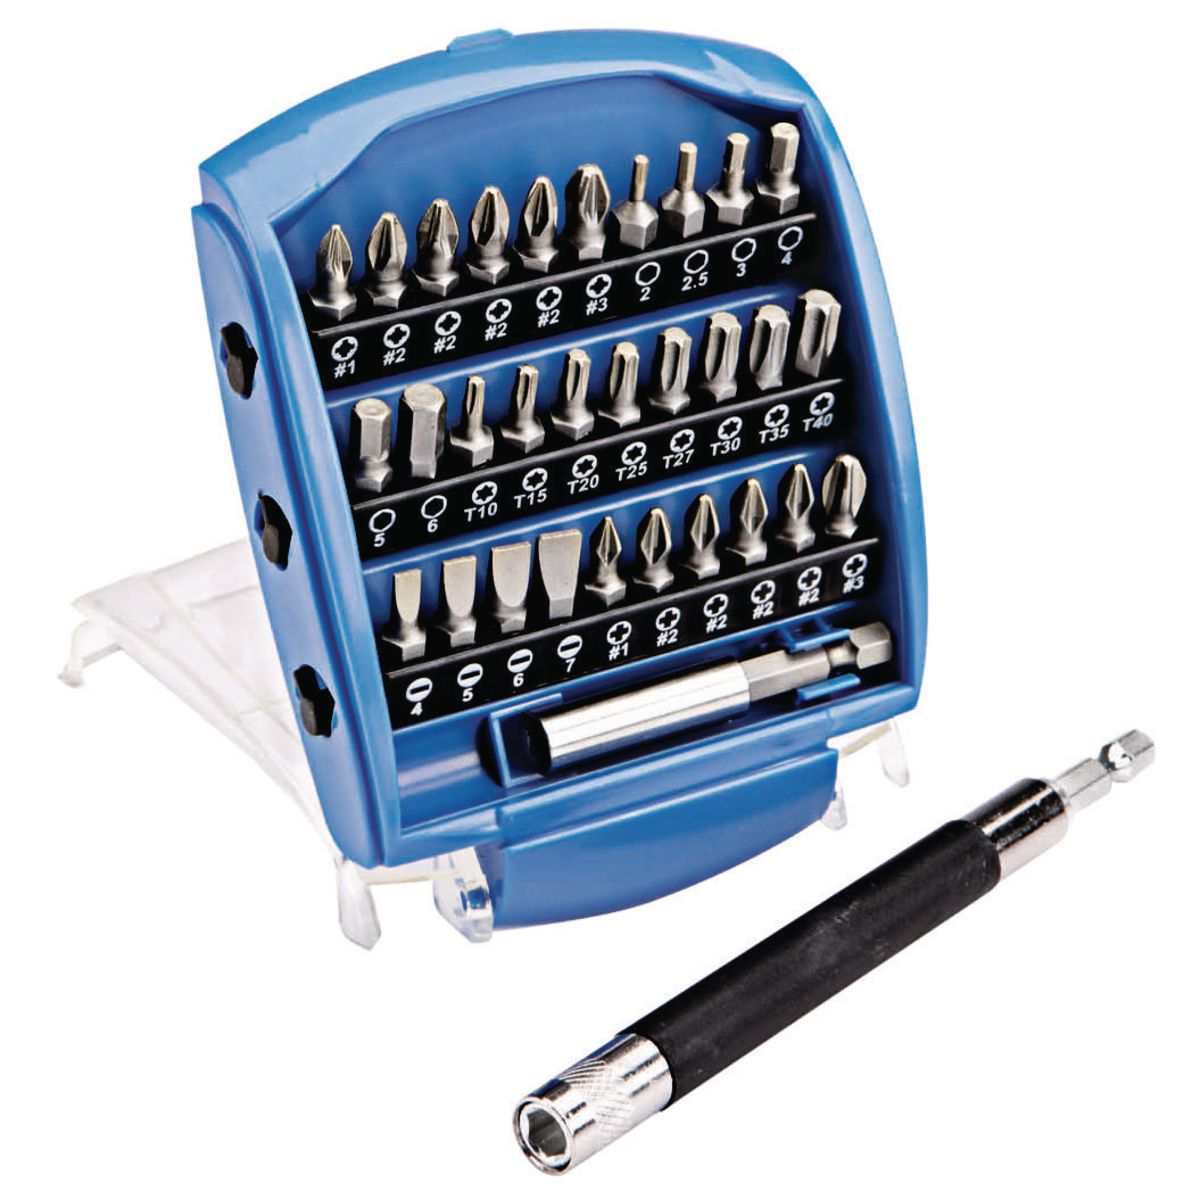 WARRIOR Magnetic Driver Guide Kit 32 Pc. - Item 68515 / 97034